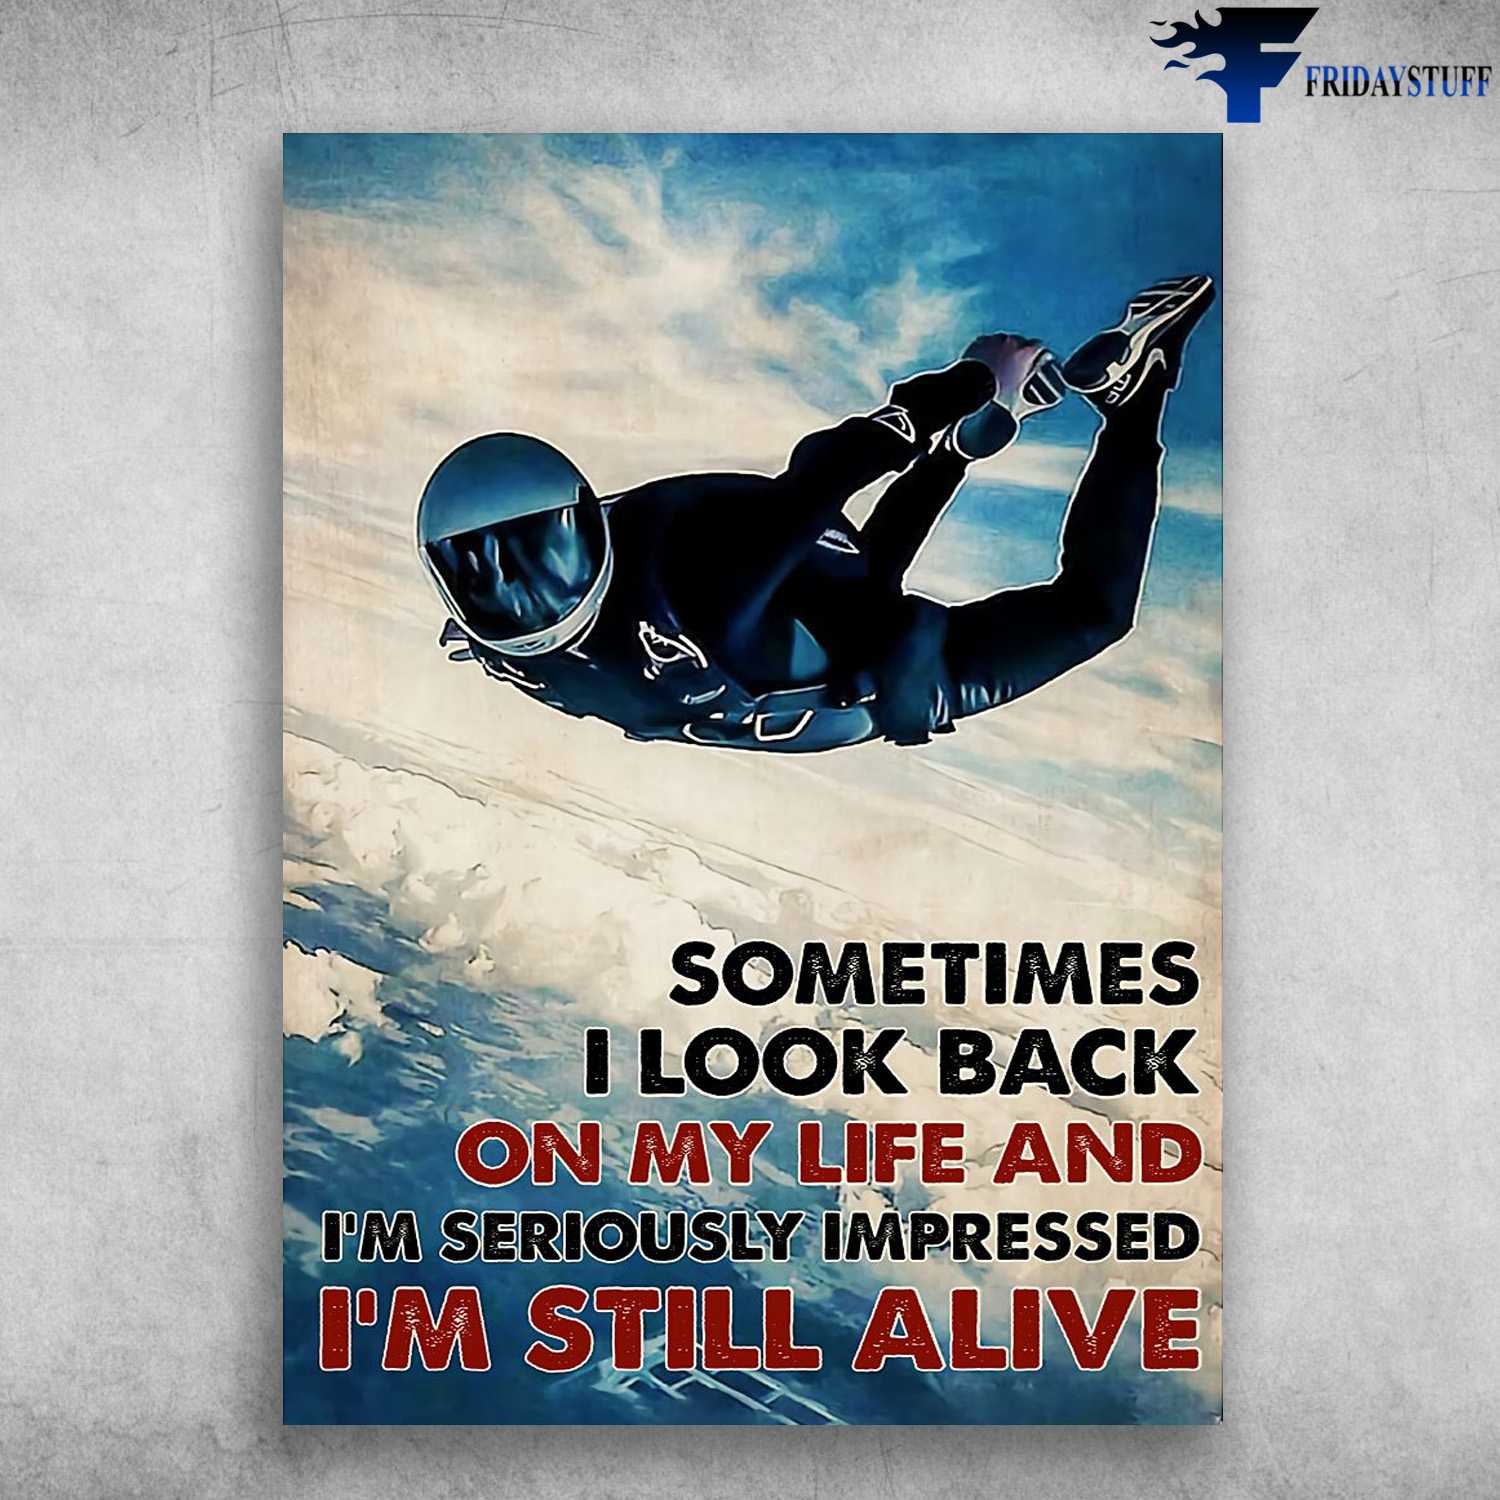 Skydiving Man, Skydiving Poster, Sometimes I Look Back, On My Life, And I'm Seriously Impressed, I'm Still Alive